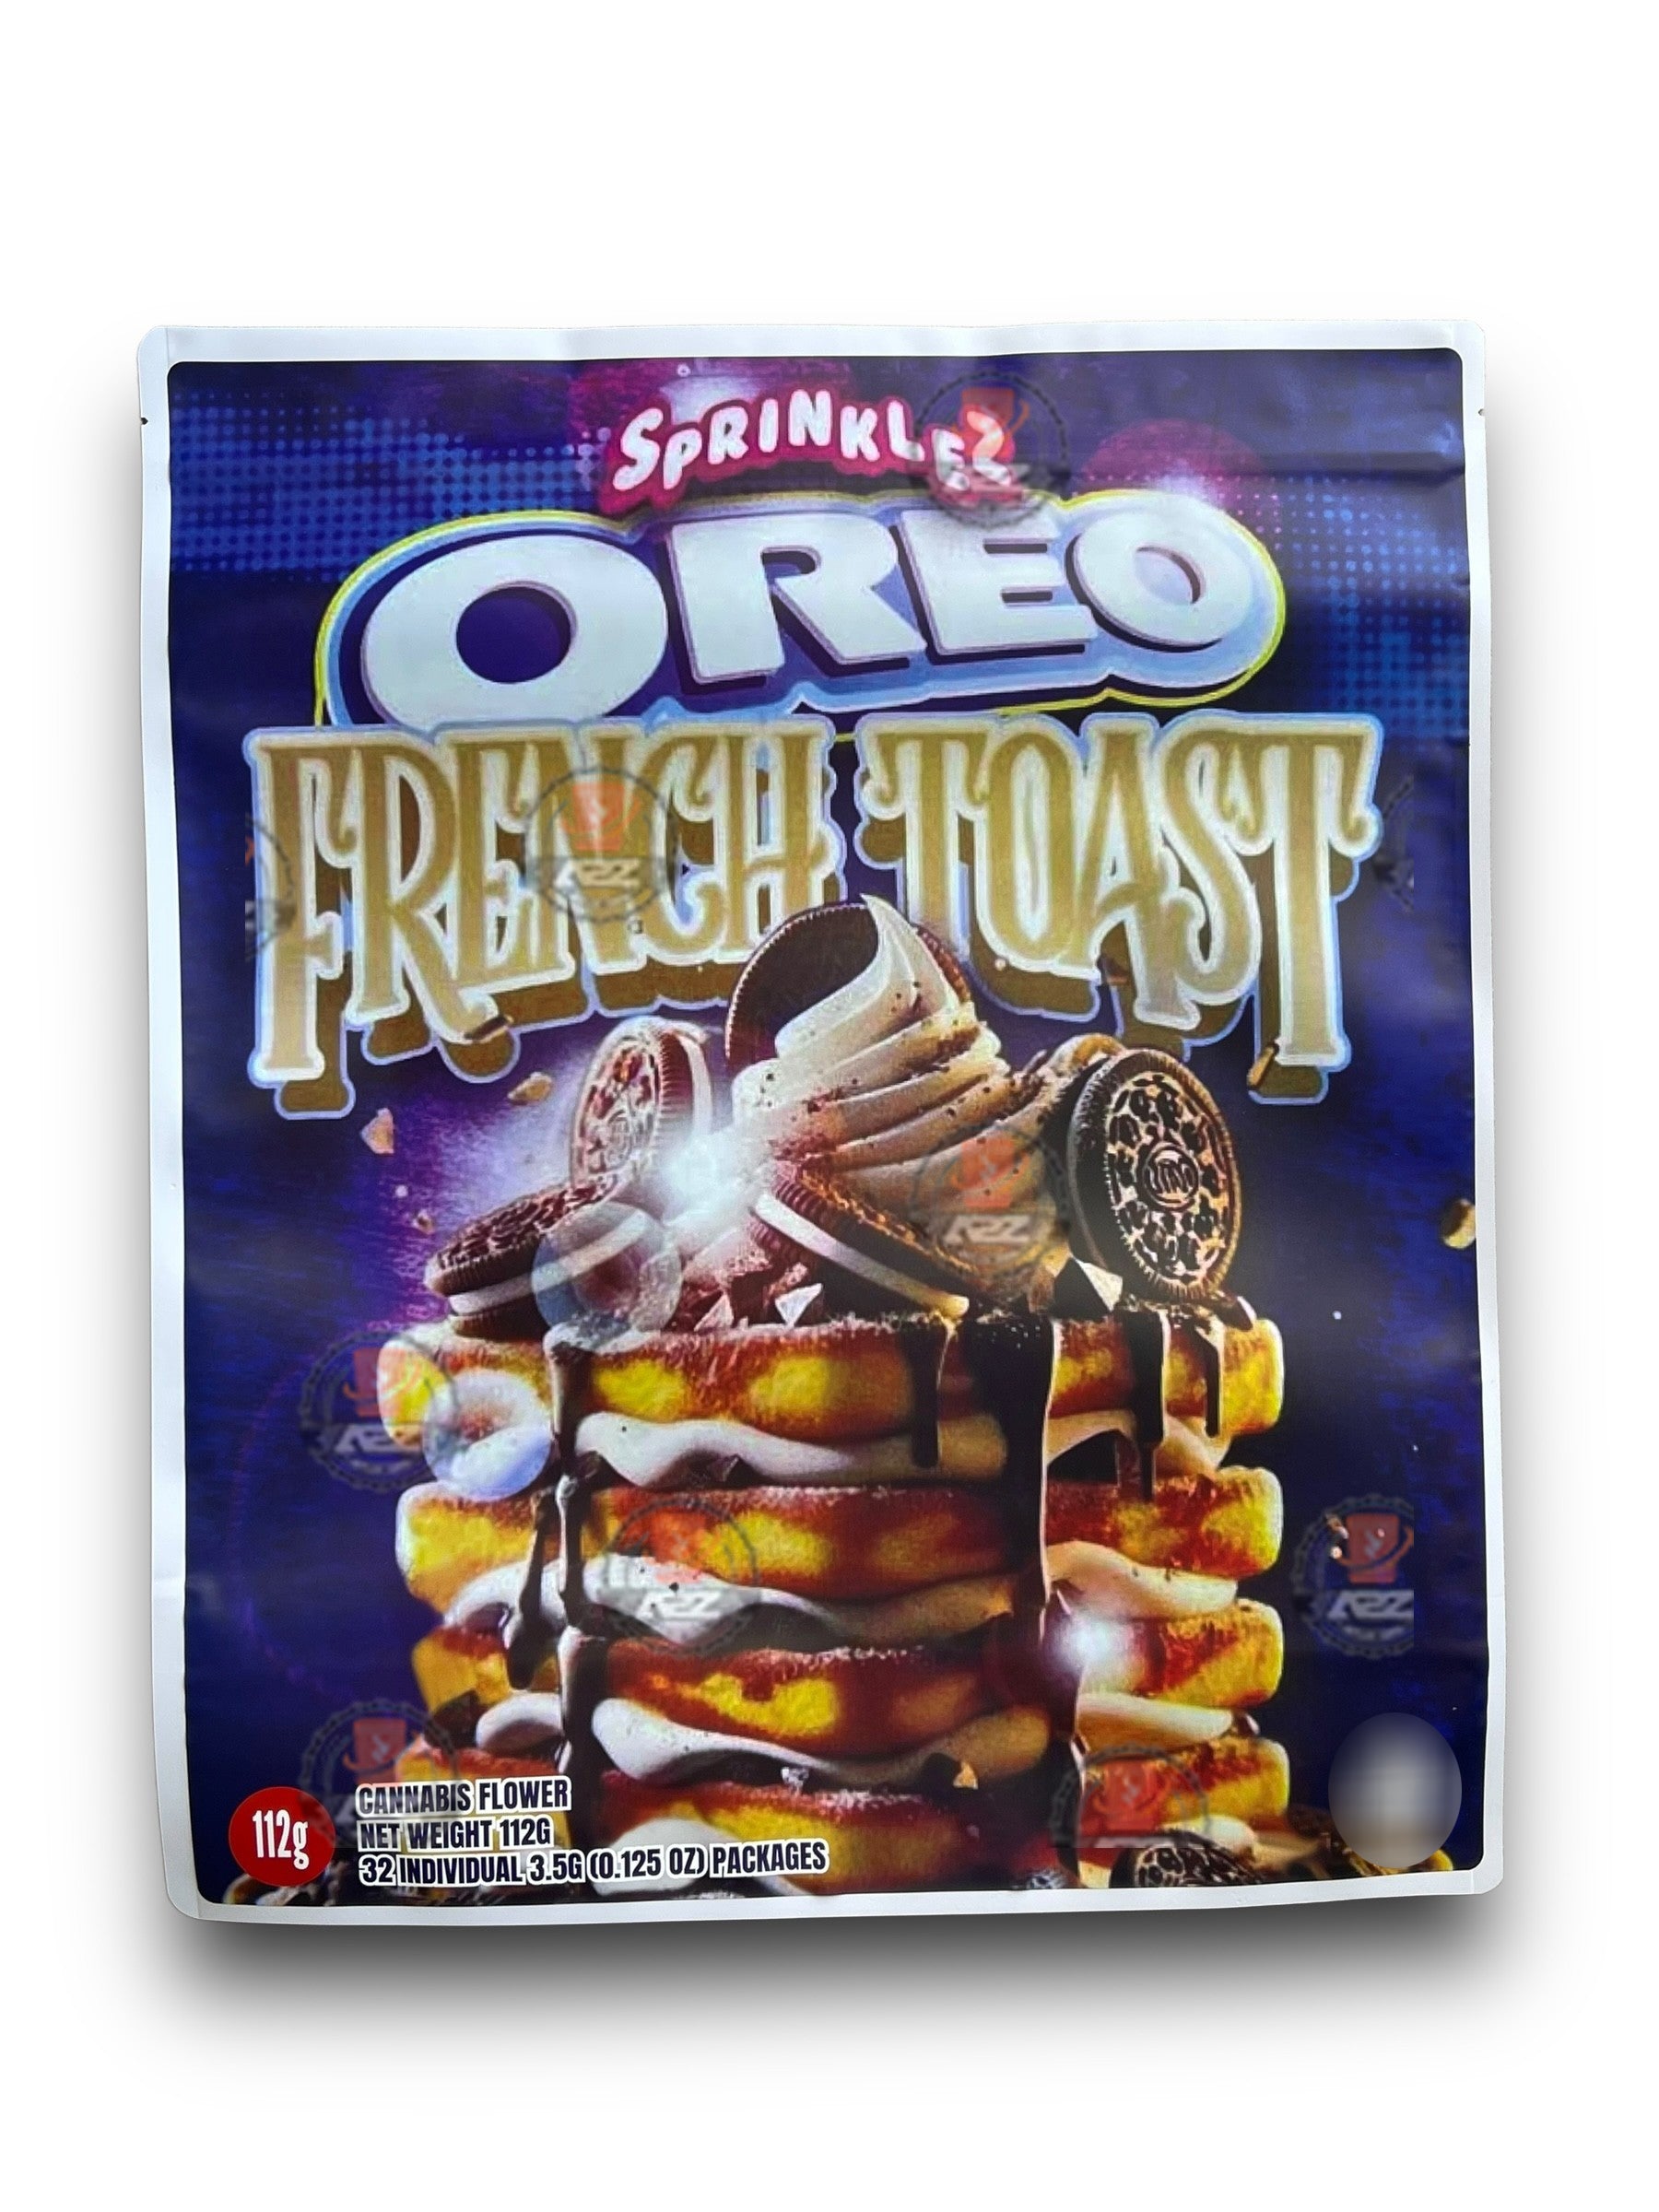 Sprinklez Oreo French Toast 1 Pound Mylar Bag Net Weight 112G Packaging Only